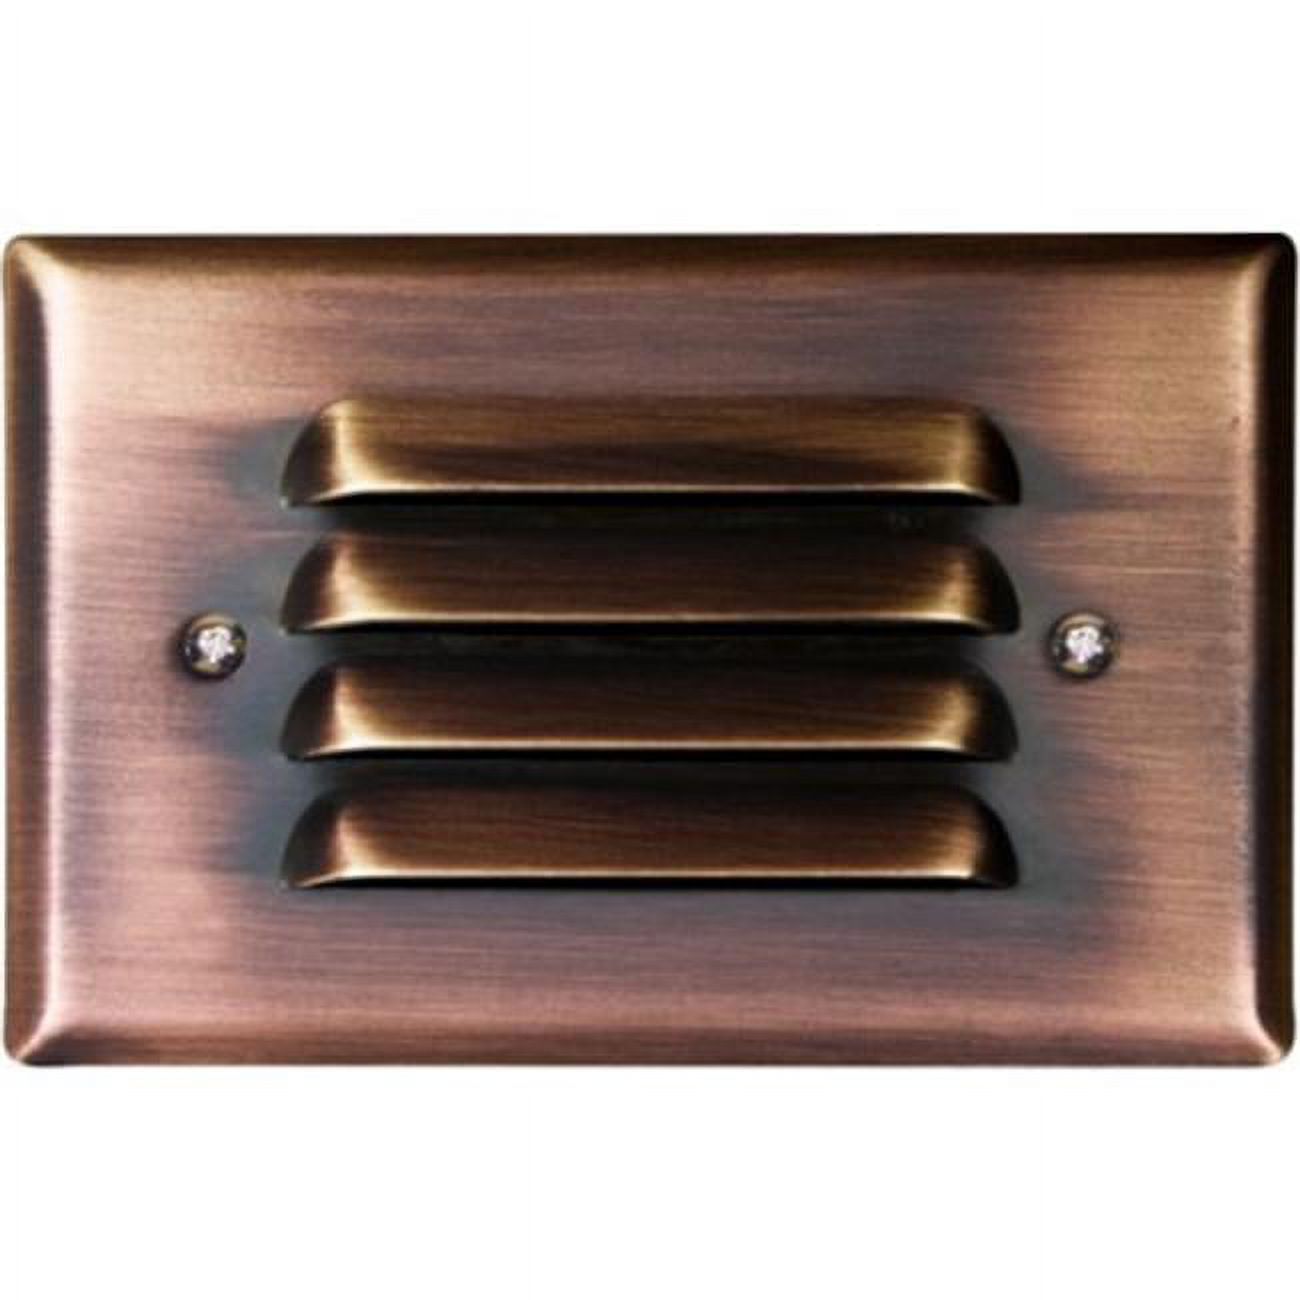 Dabmar Lighting  2.5W & 12V JC-LED Recessed Louvered Down Brick - Step & Wall Light - Antique Bronze Cover - image 1 of 1